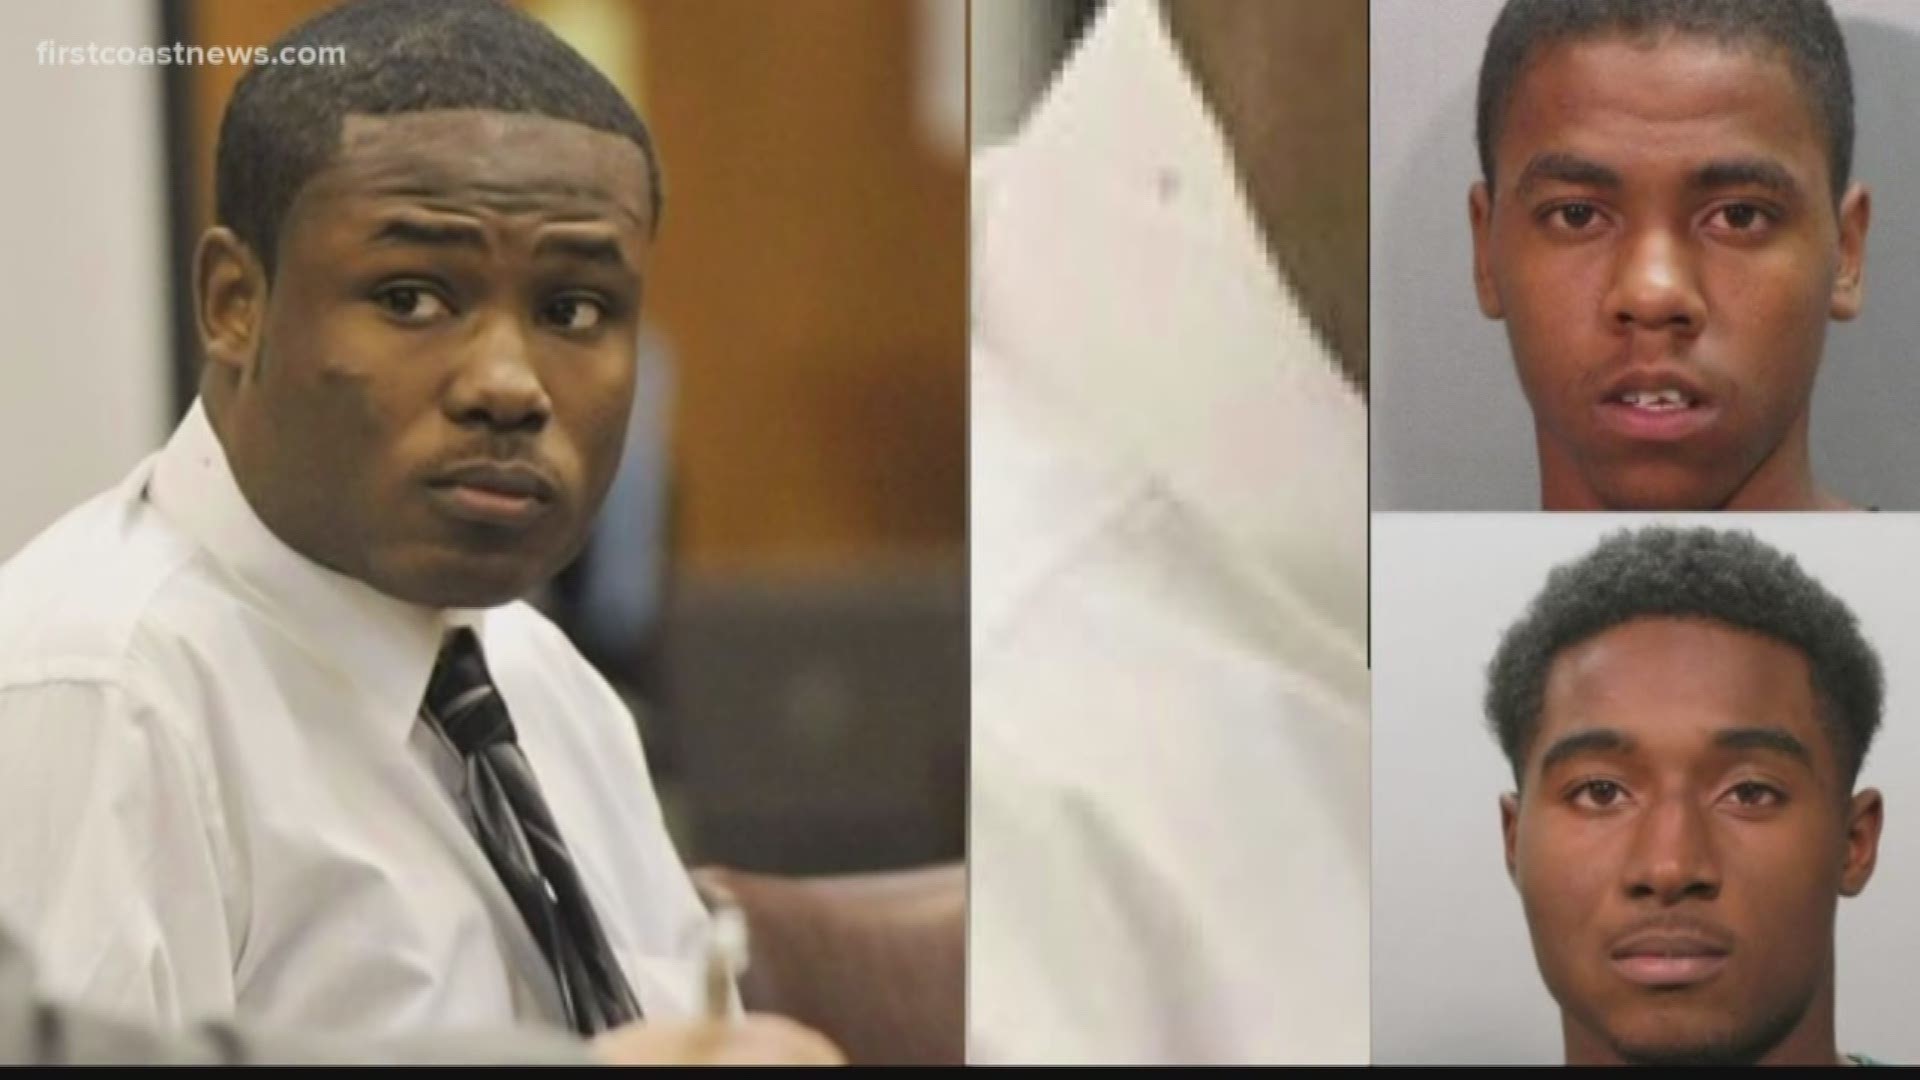 A six member jury awarded compensatory and punitive damages against the men involved in the 20-year-old's death.